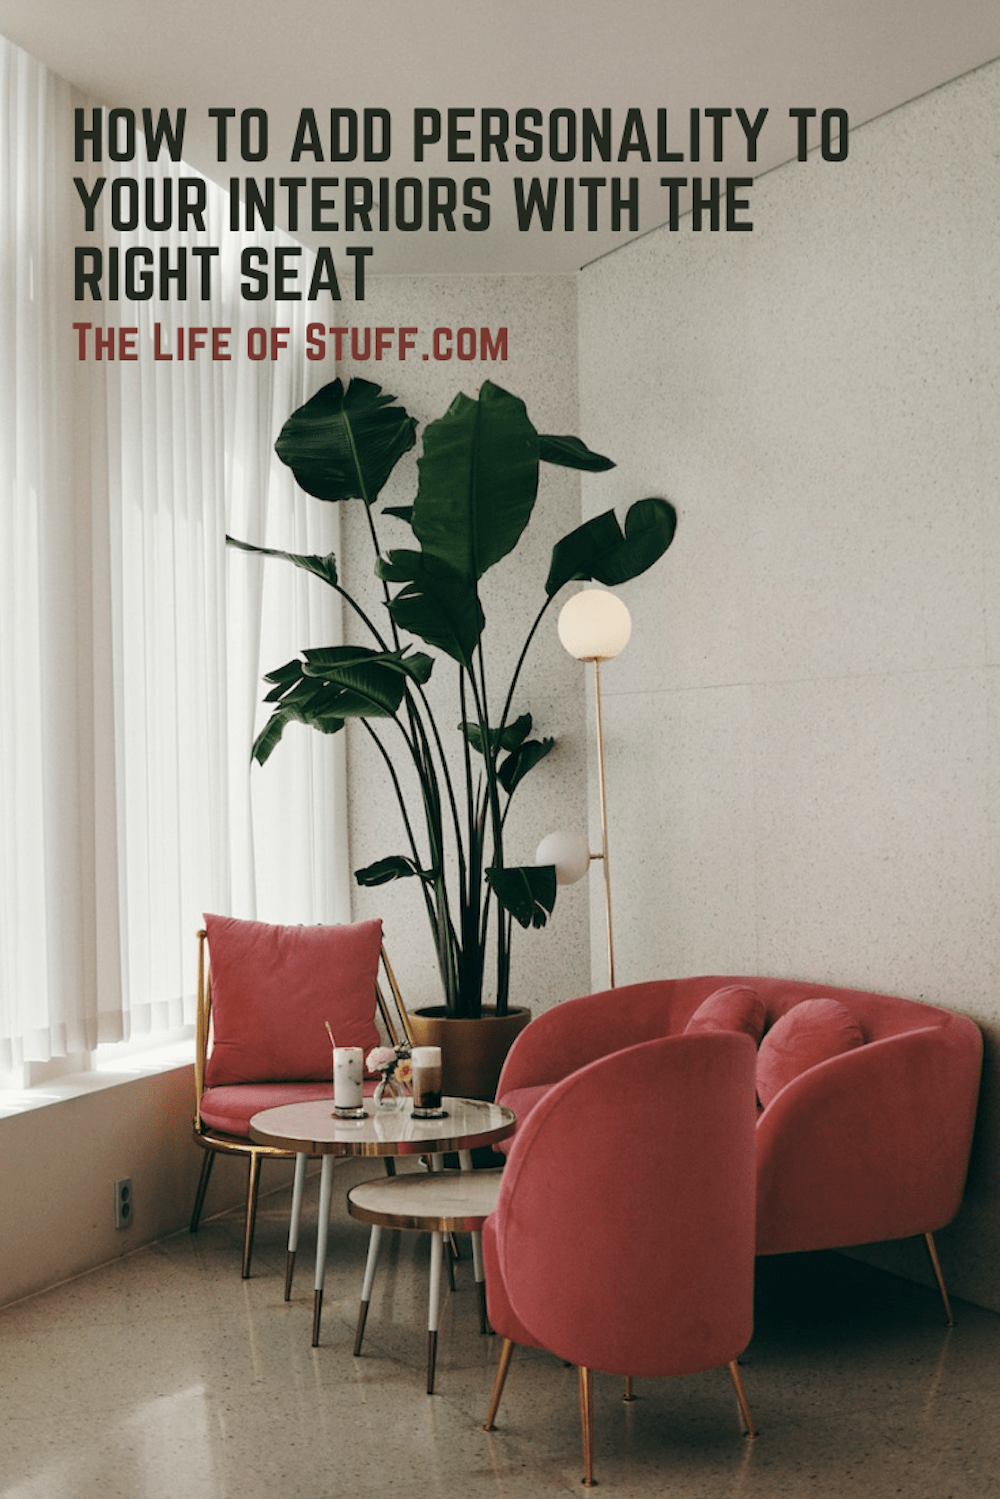 How To Add Personality To Your Interiors With The Right Seat - The Life of Stuff